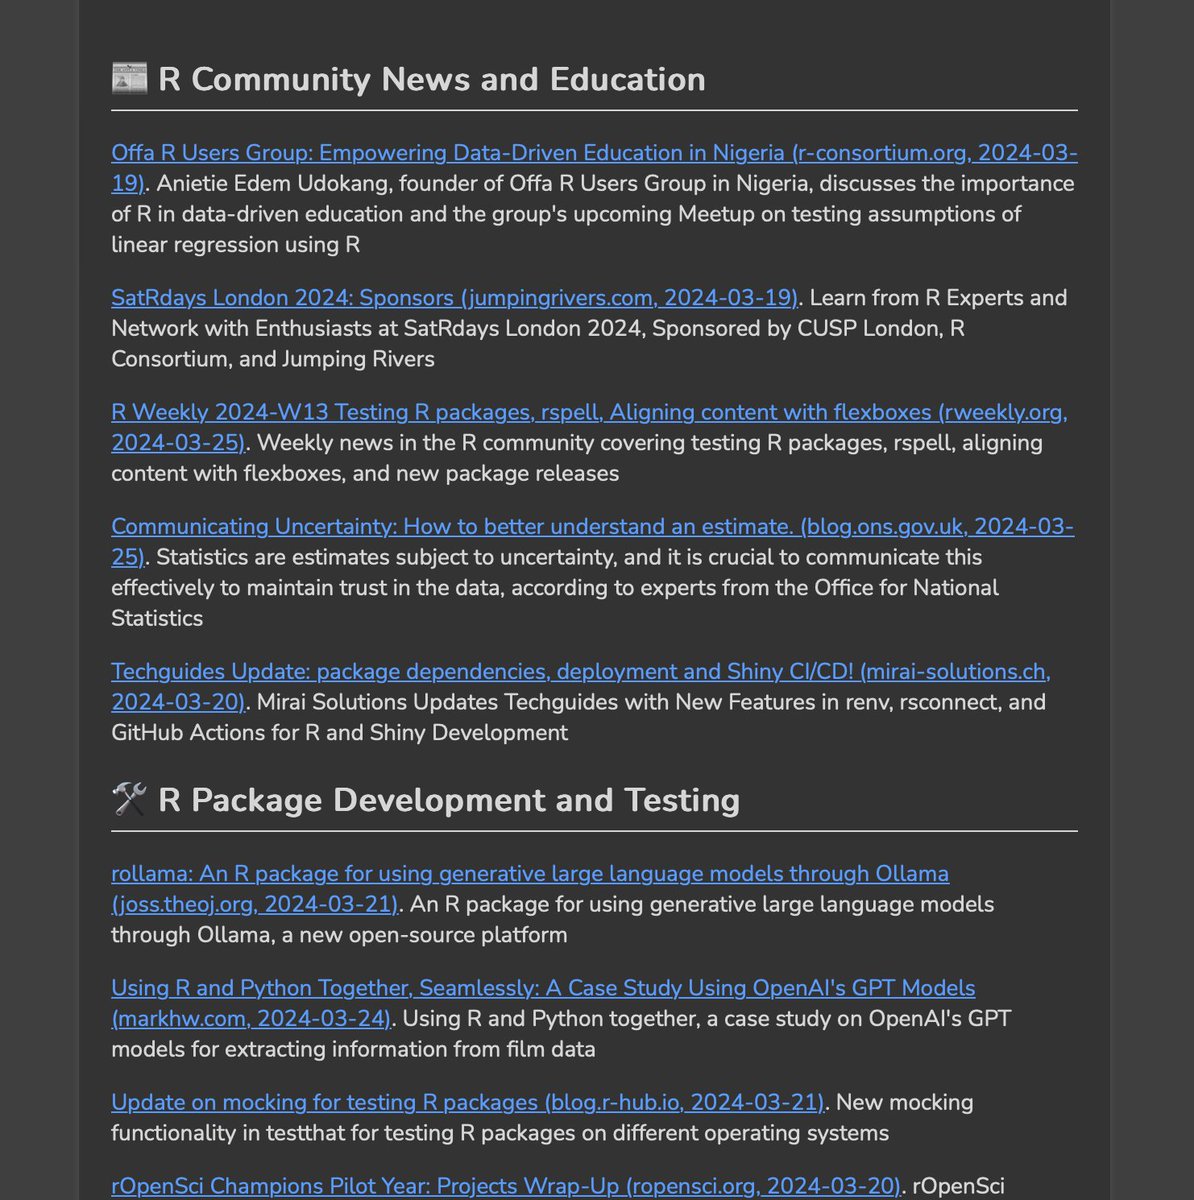 Data science with #rstats newsletter digest (26th March) just dropped! A bunch of updates from the last week! ✨ preview pdf @ tinyurl.com/blaze-r-weekly ✅ subscribe (free) @ getblaze.email